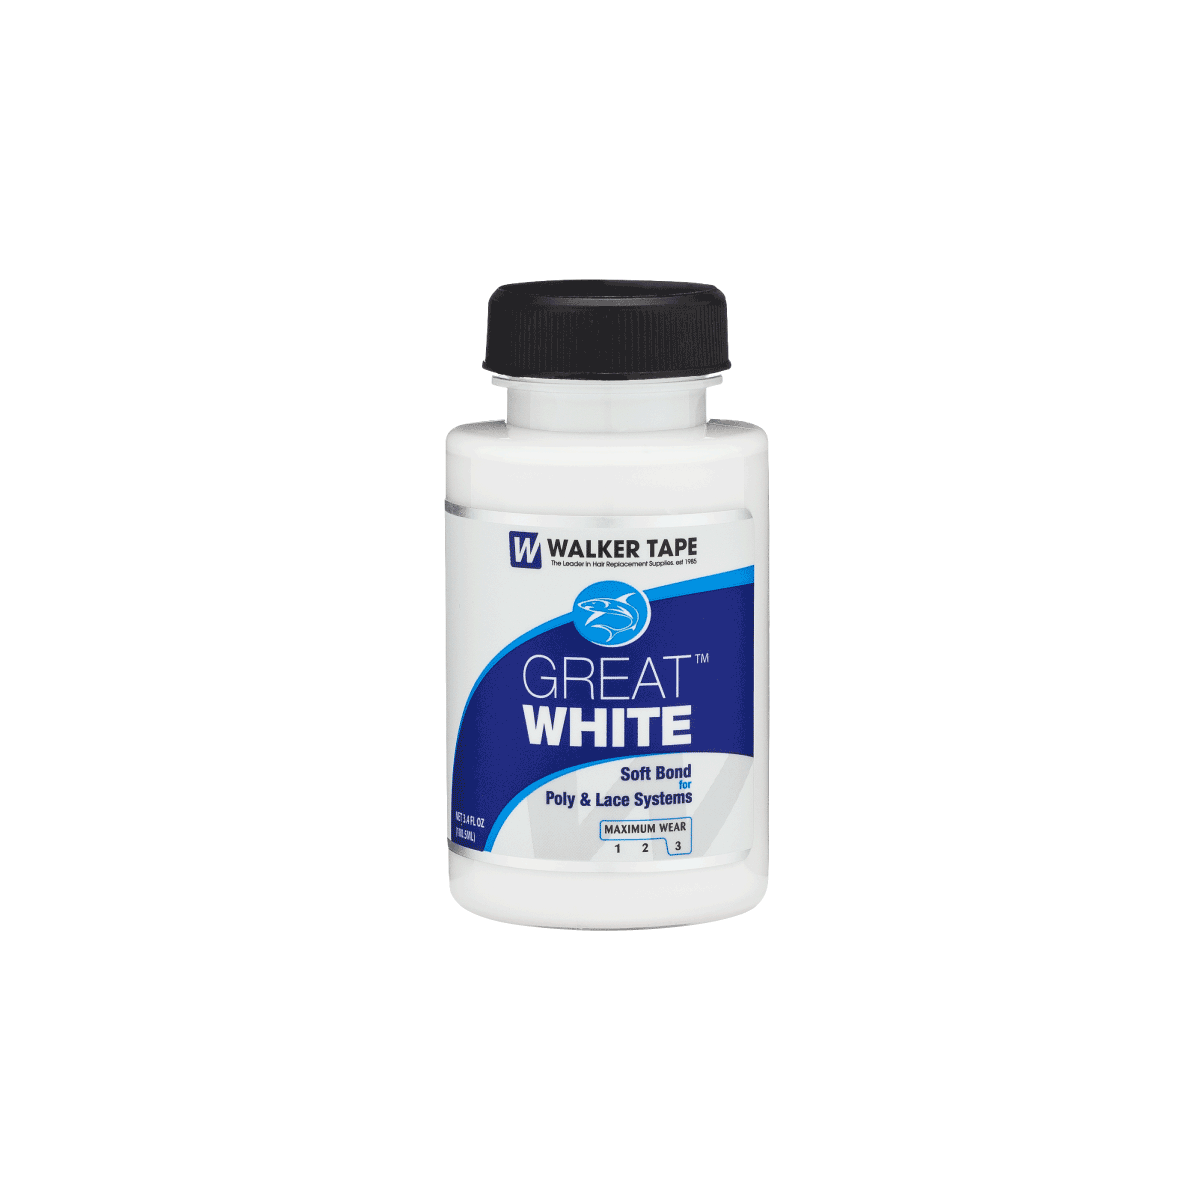 GREAT WHITE Soft Bond Adhesive for Poly & Lace Systems 3.4 oz. - Click Image to Close